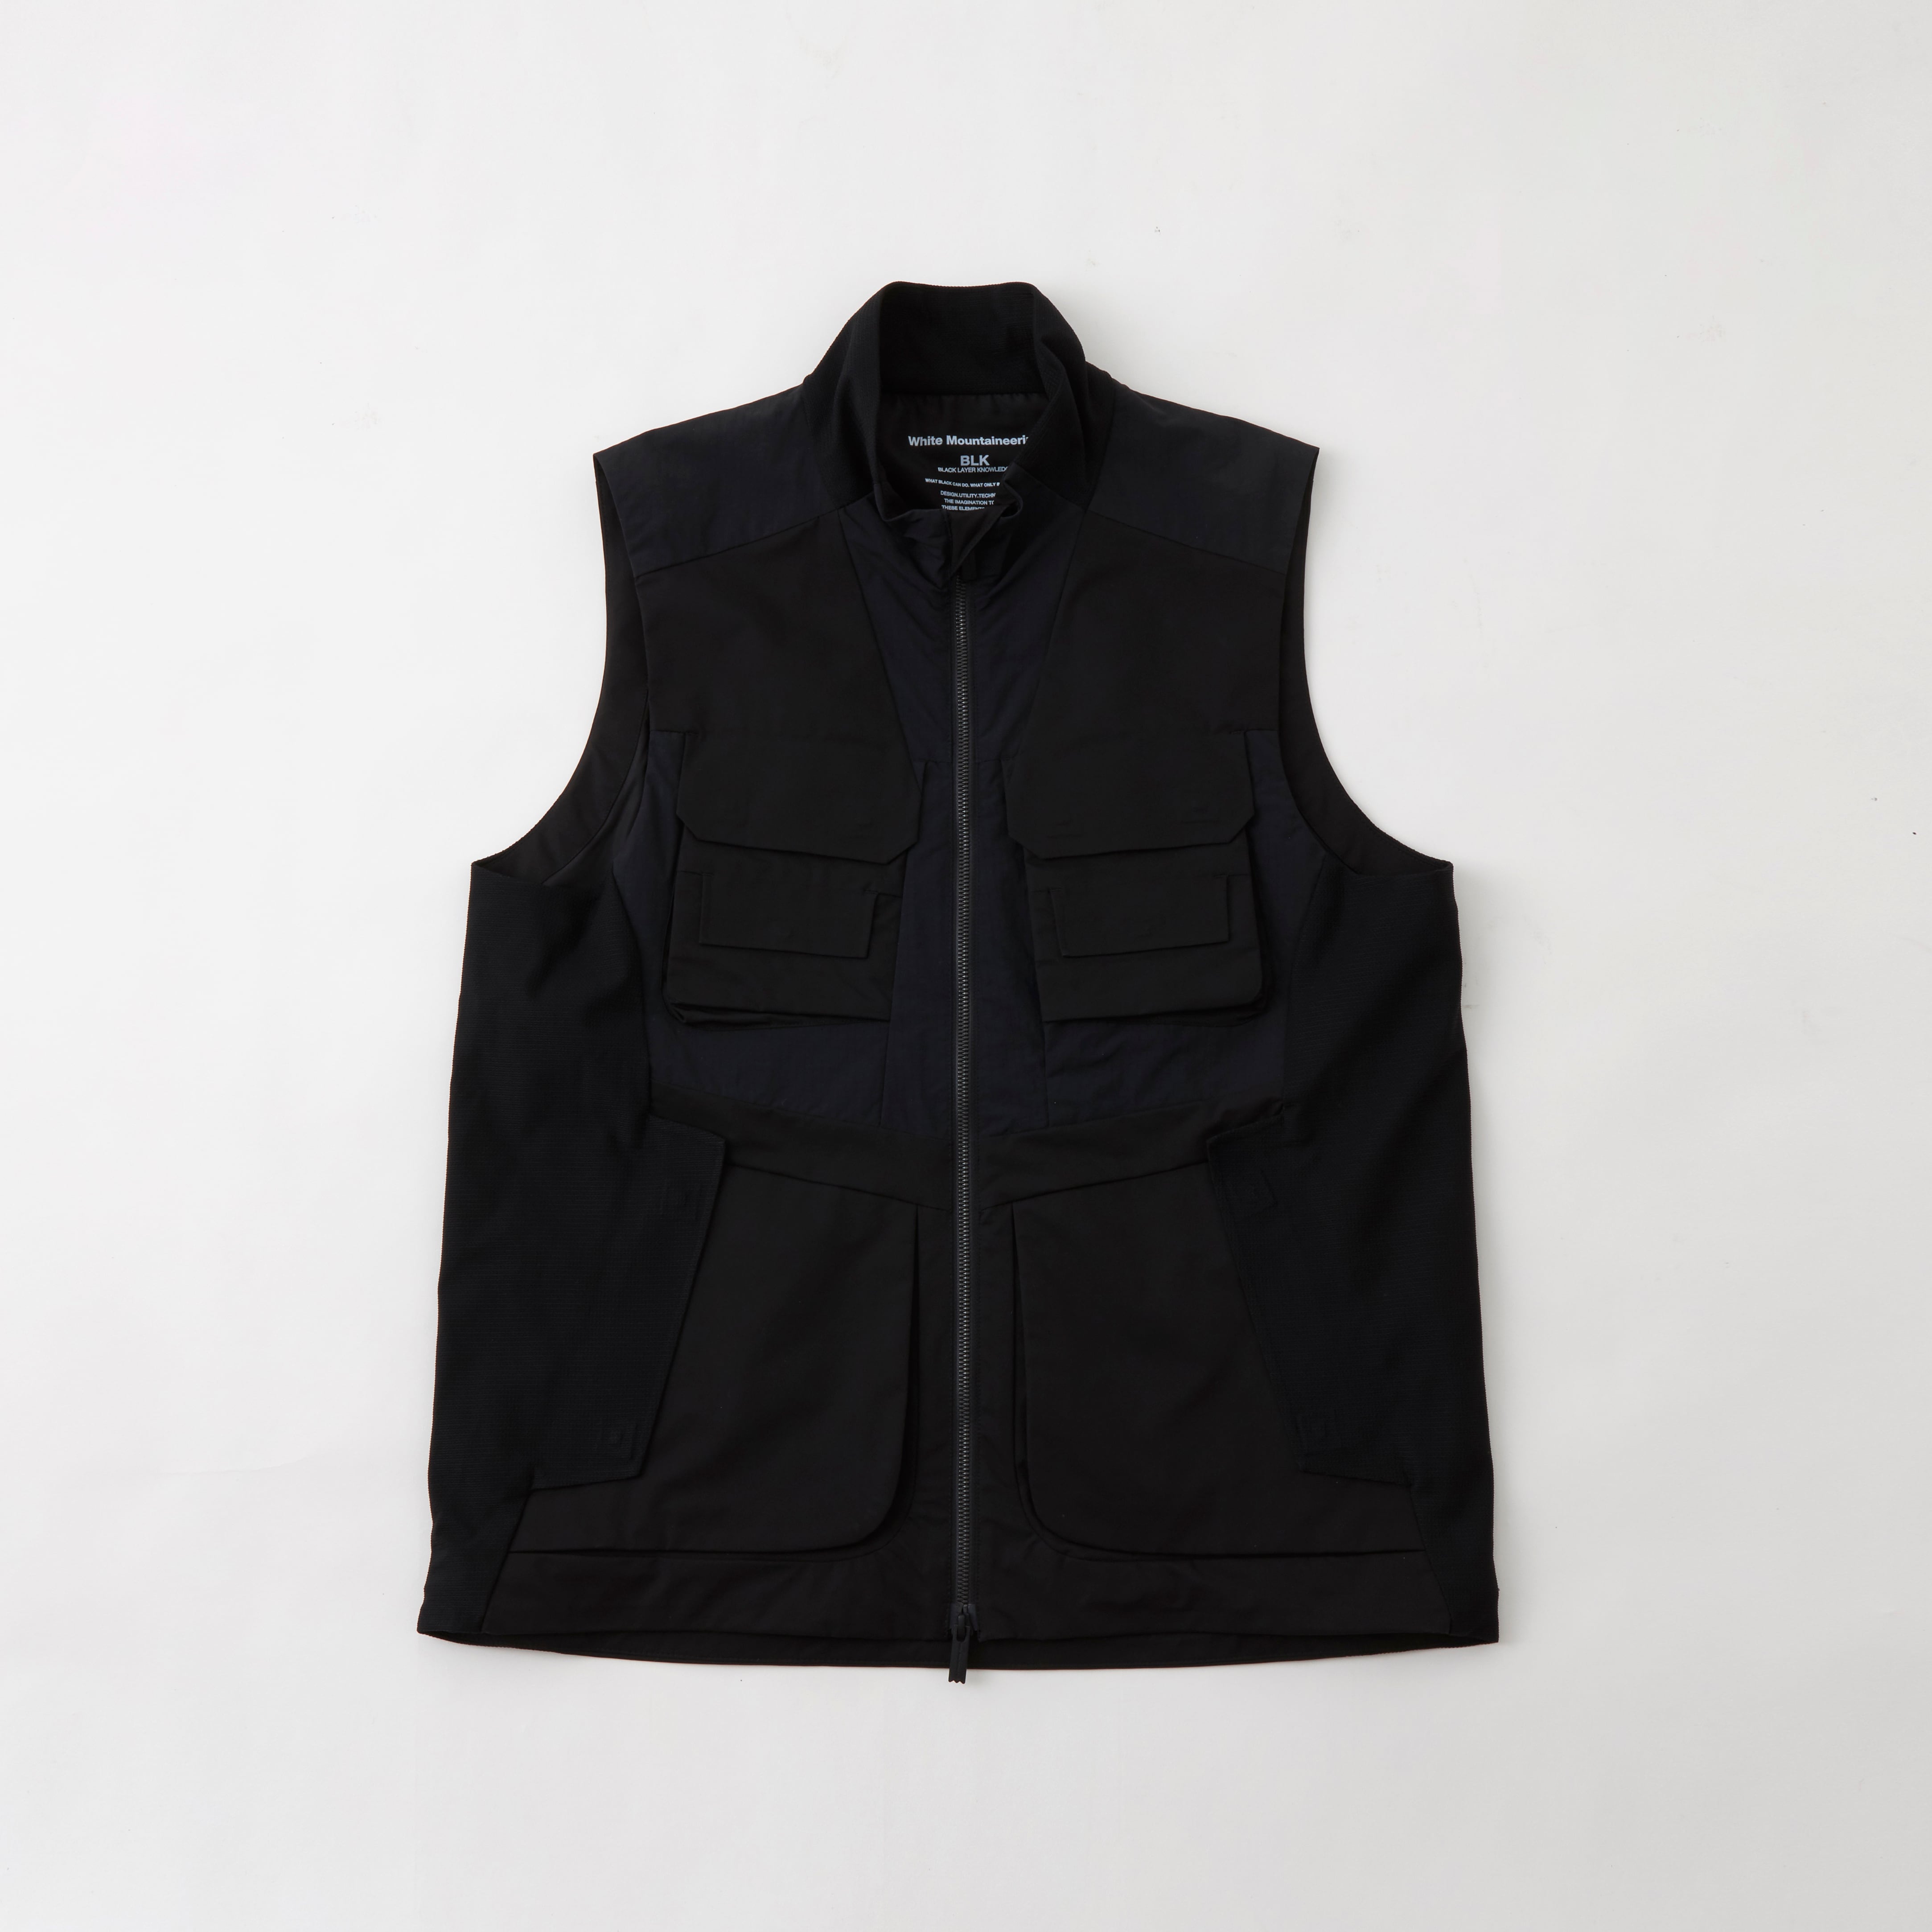 White Mountaineering Online-Store